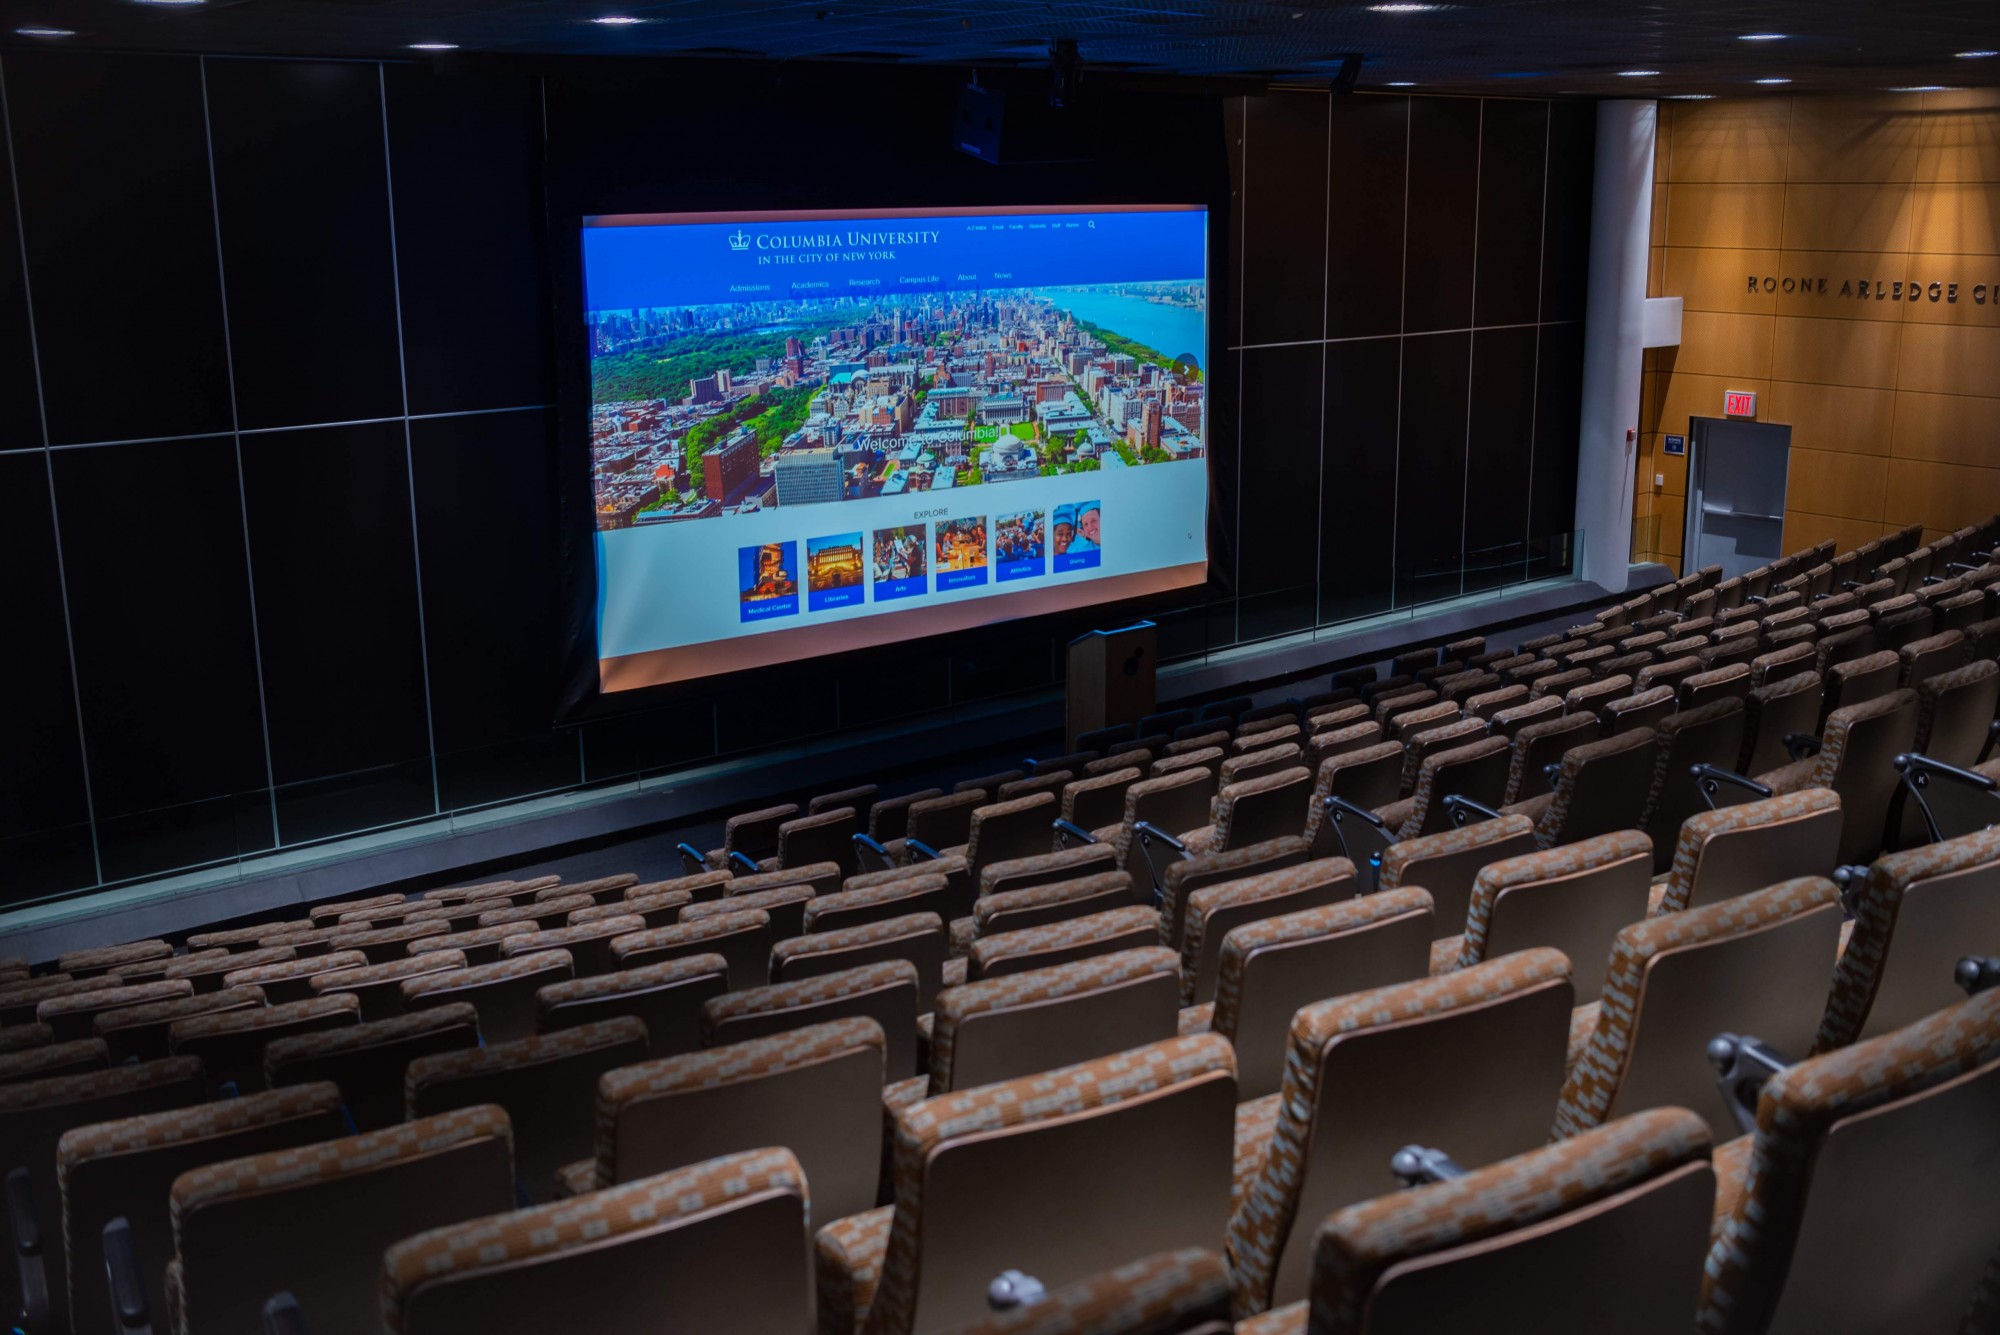 The picture shows an auditorium with theater-style seating. Rows of blue chairs face a large projector screen that shows the Columbia lion. 